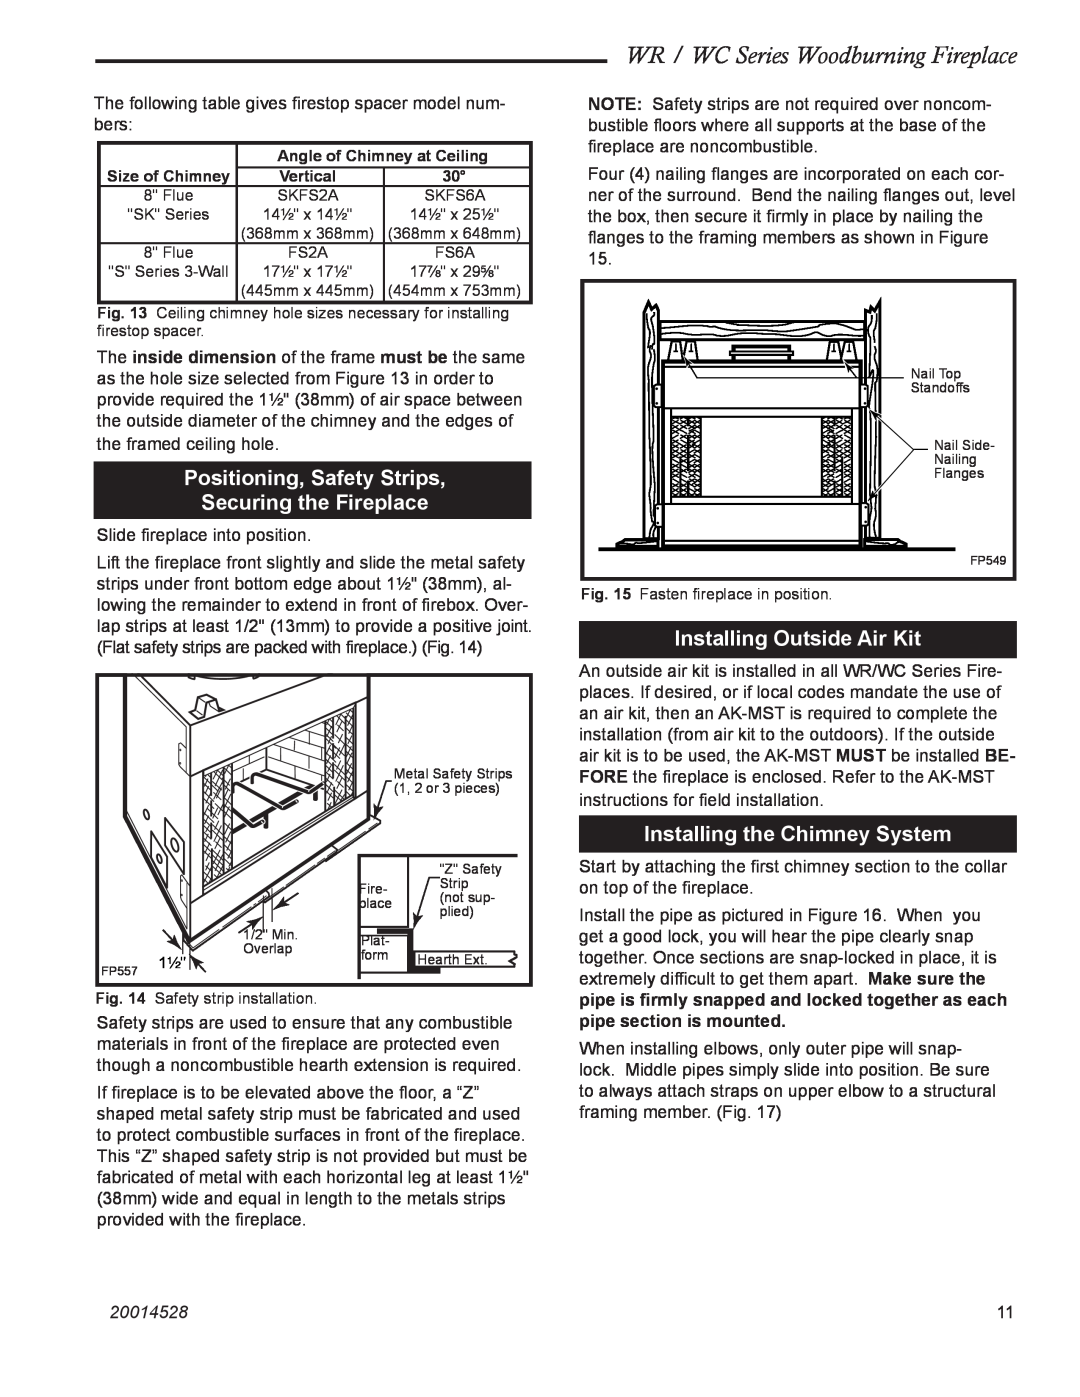 Monessen Hearth WC500, WC400, WR400 Positioning, Safety Strips Securing the Fireplace, Installing Outside Air Kit, 20014528 